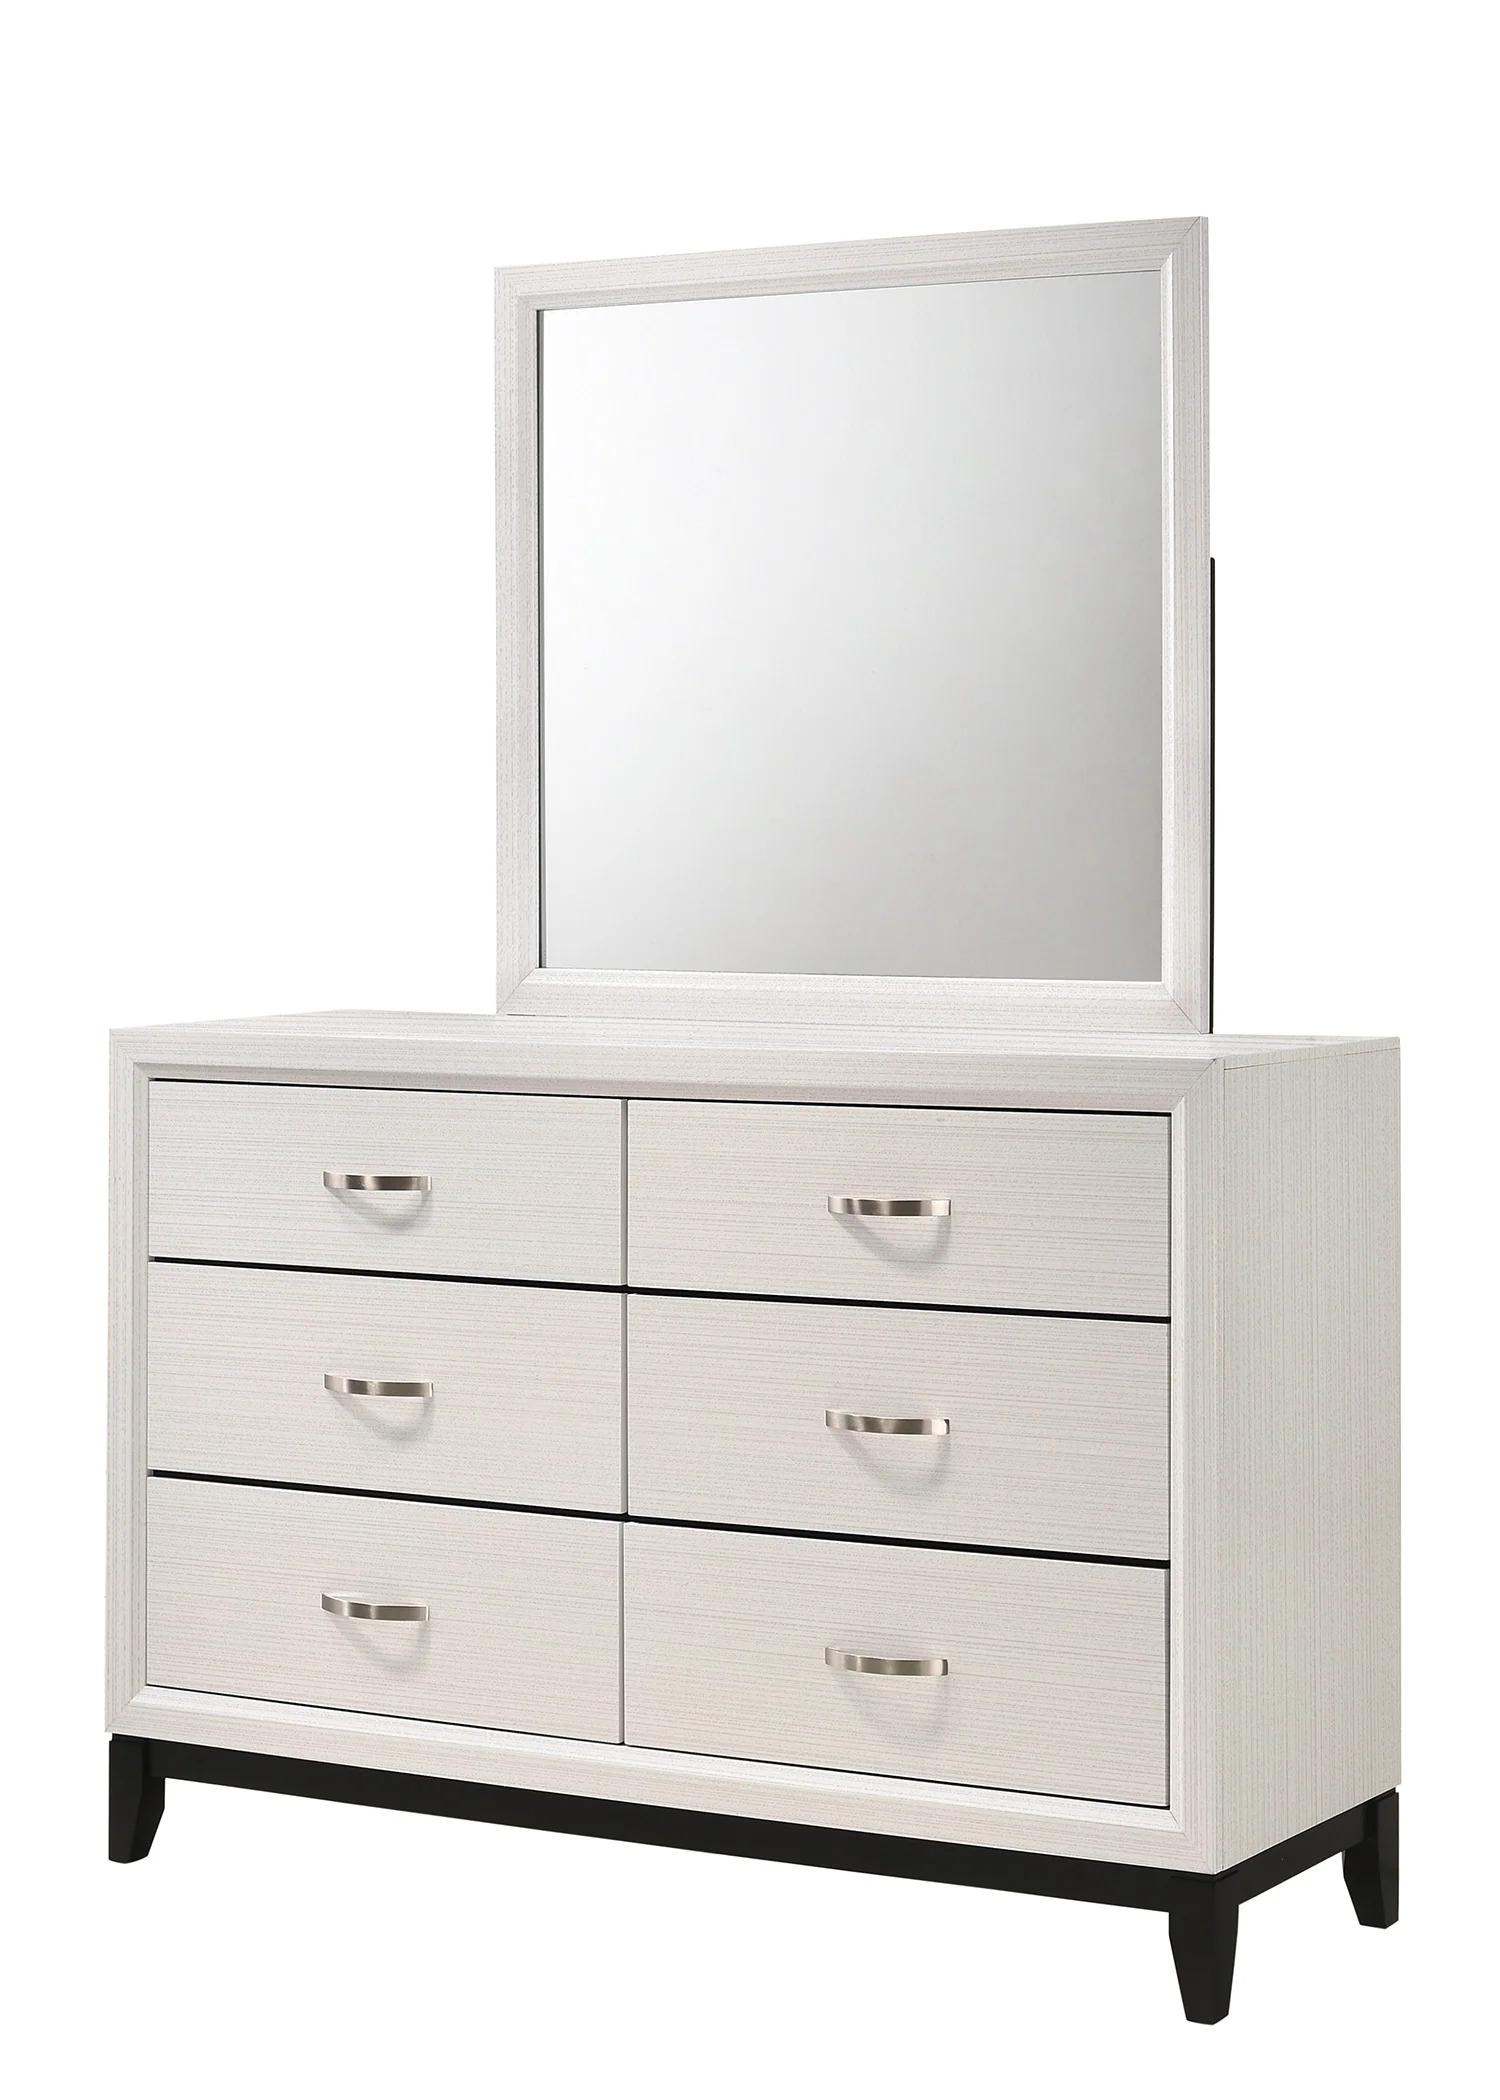 Panel Bed Dresser and  Mirror with Nightstand in white